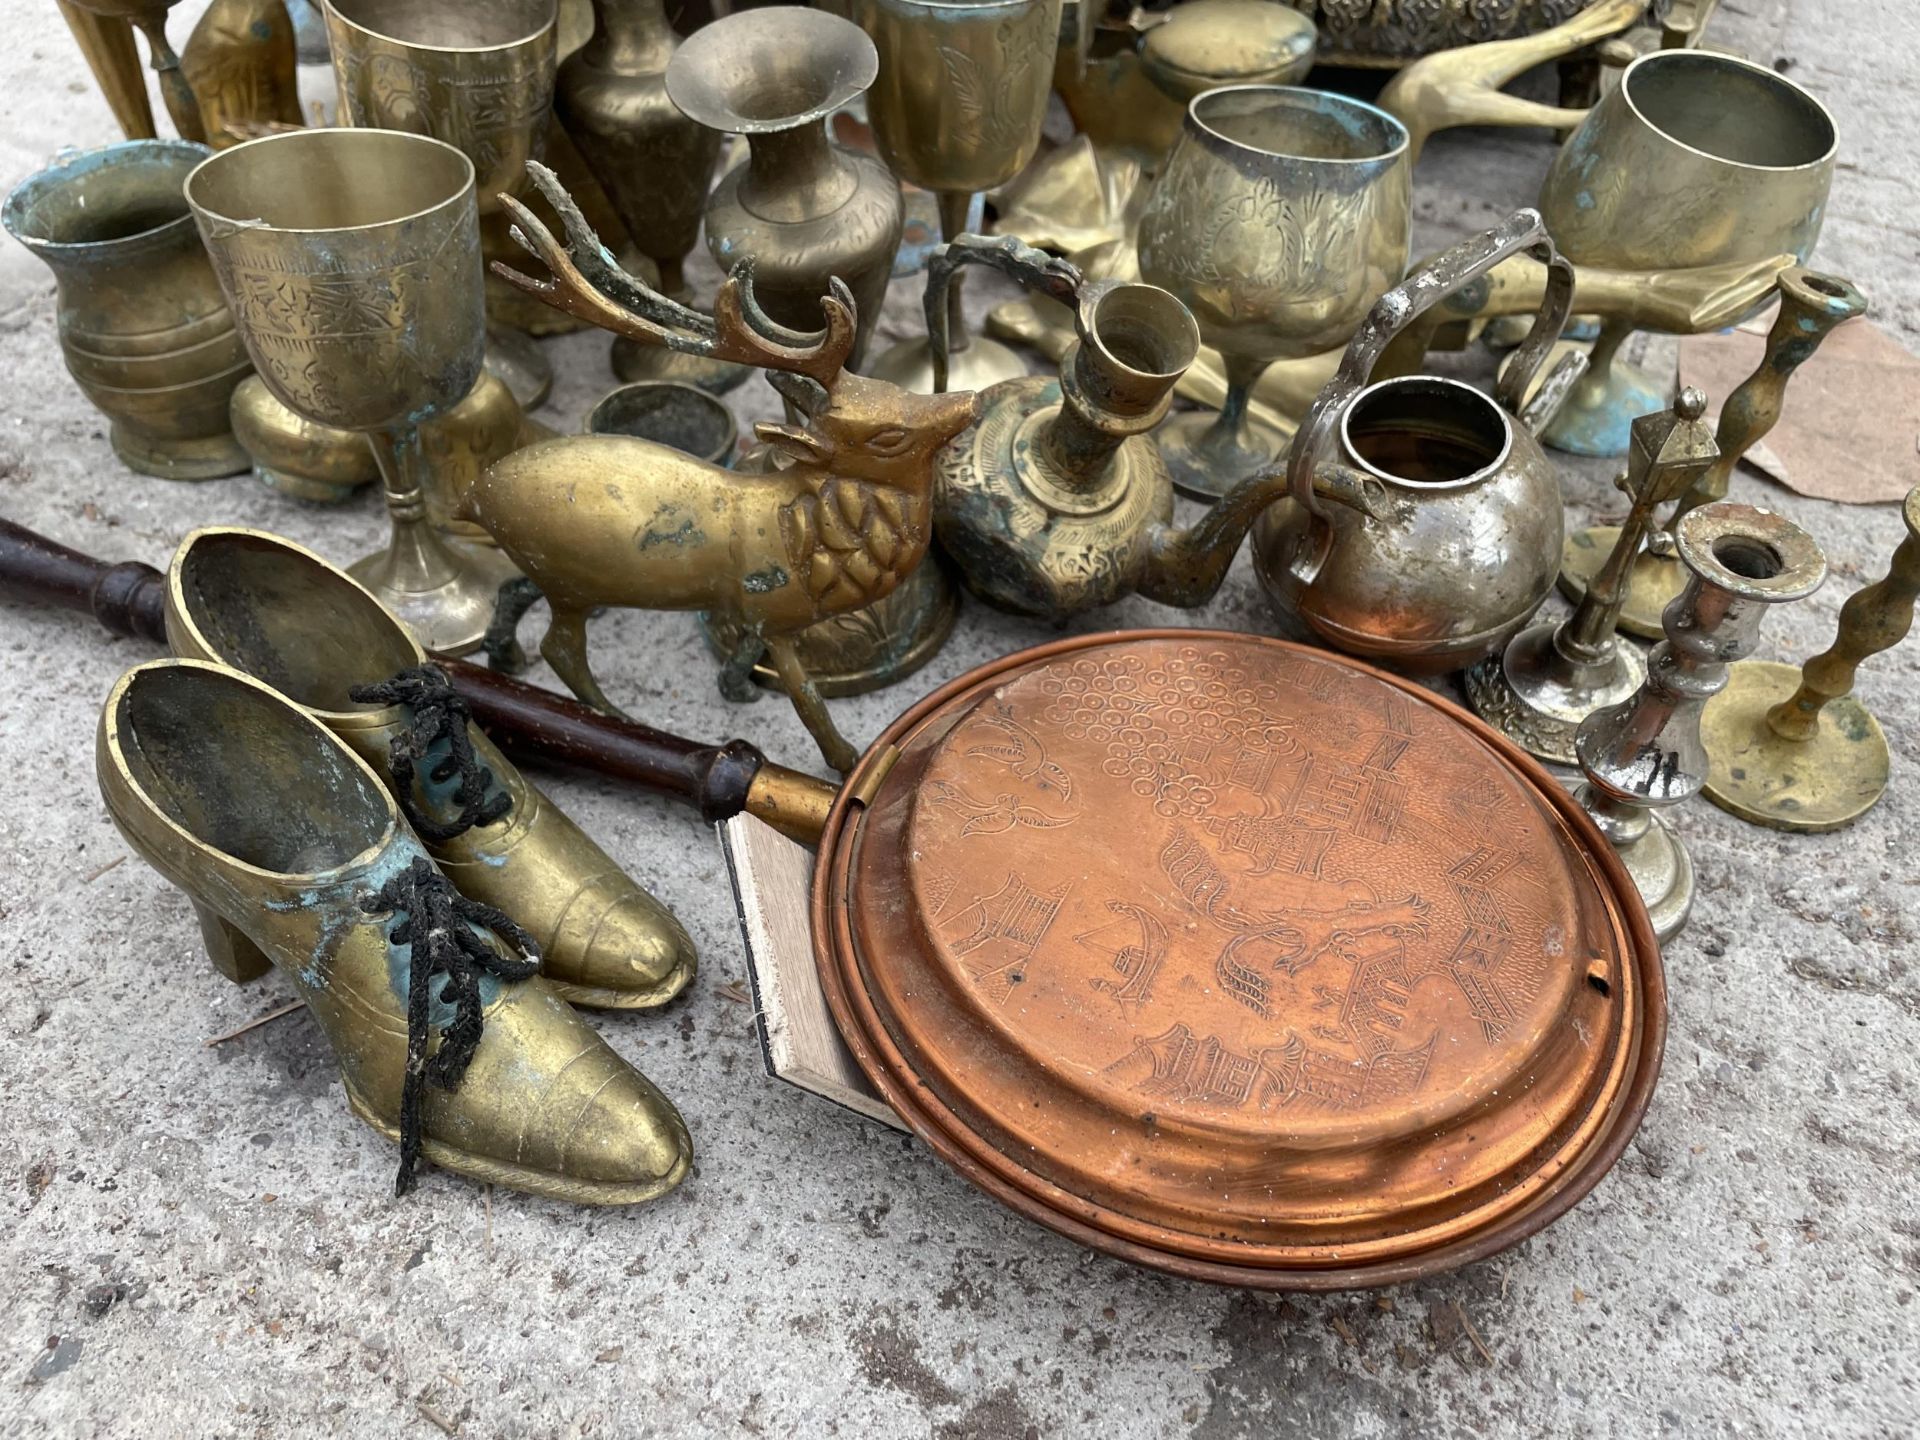 A LARGE ASSORTMENT OF METAL WARE ITEMS TO INCLUDE A COPPER VASE, BRASS GOBLETS AND BRASS FIGURES ETC - Image 3 of 6